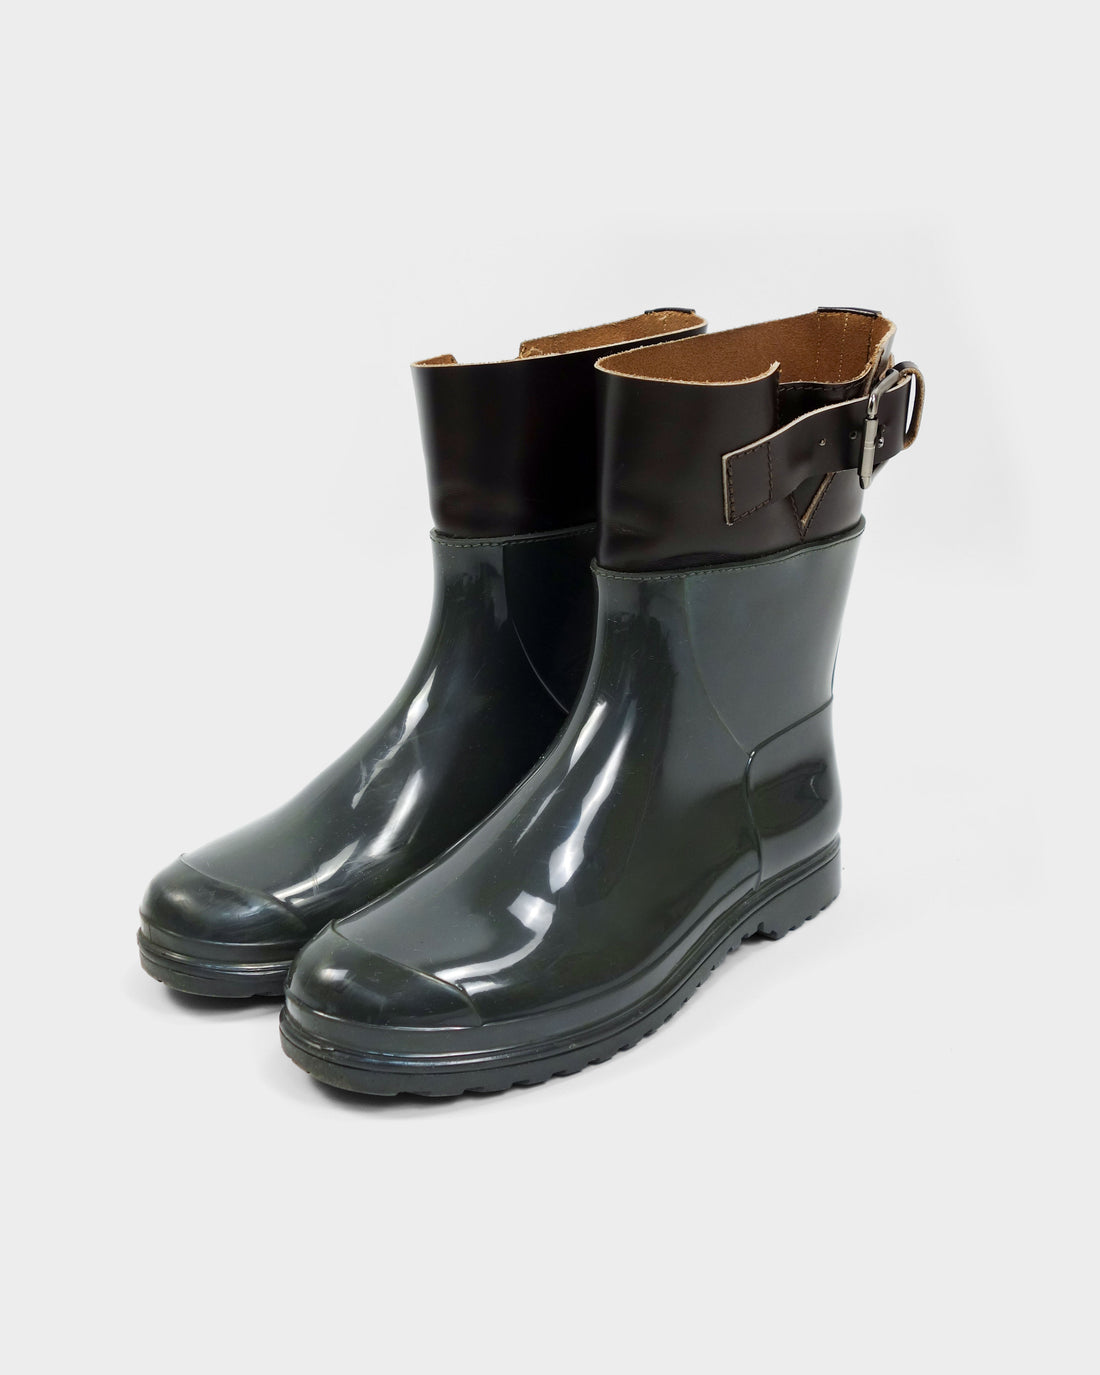 Marni Leather + Rubber Belted Raining Boots 2000's